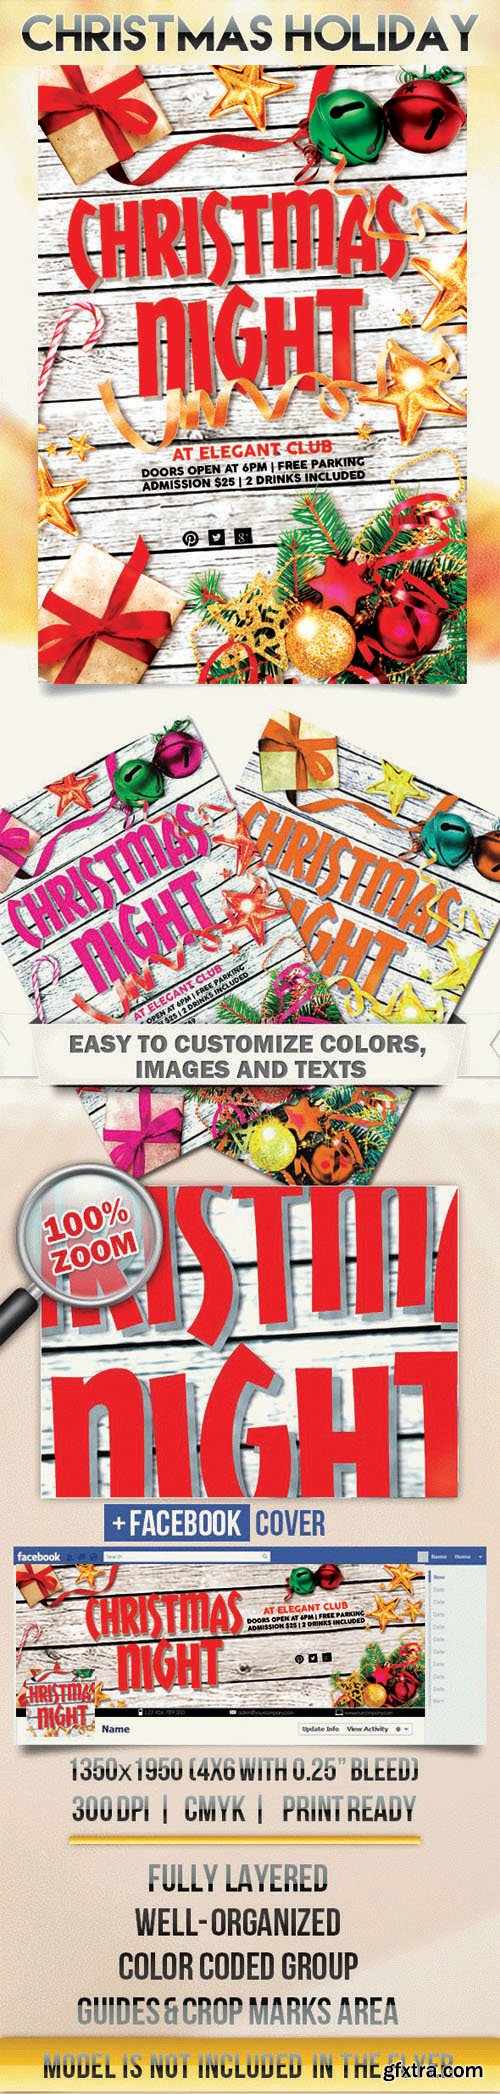 Christmas Holiday - Flyer PSD Template + Facebook Cover